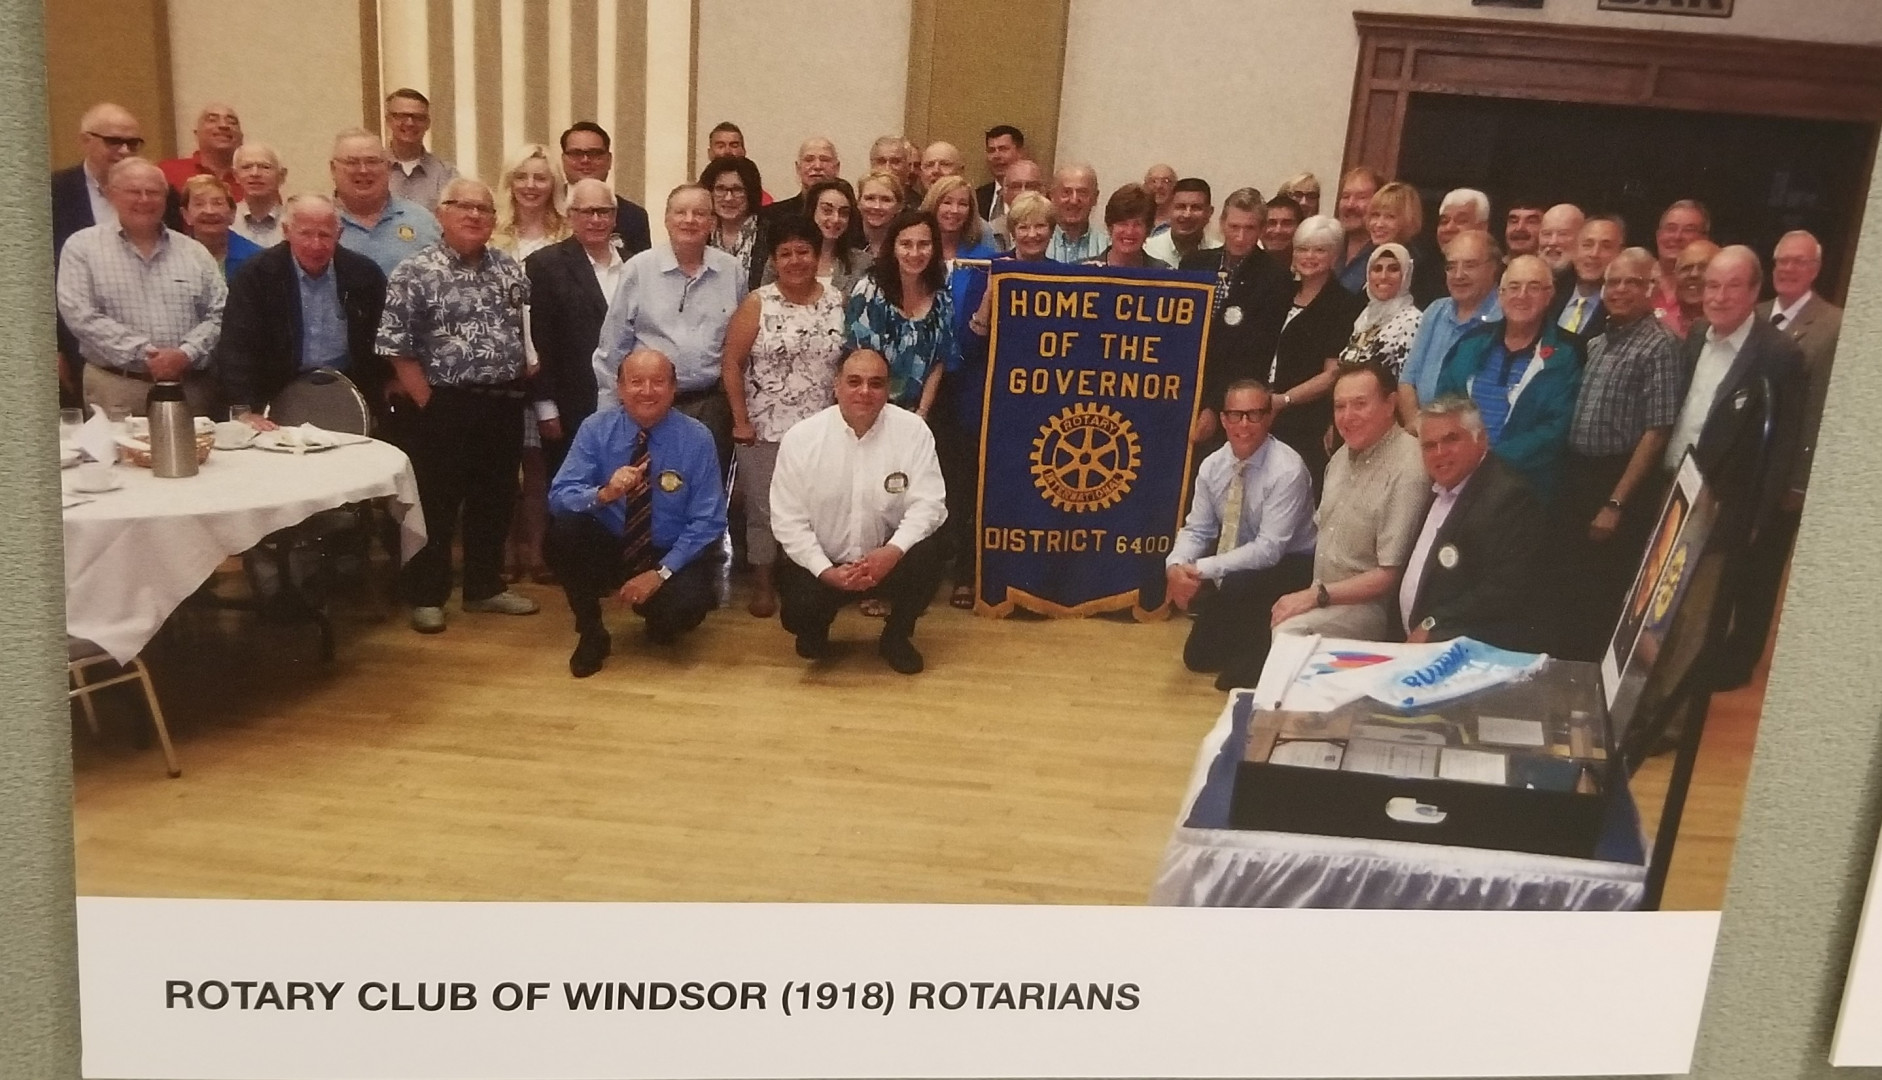 Proud to be Part of Rotary Club of Windsor 1918